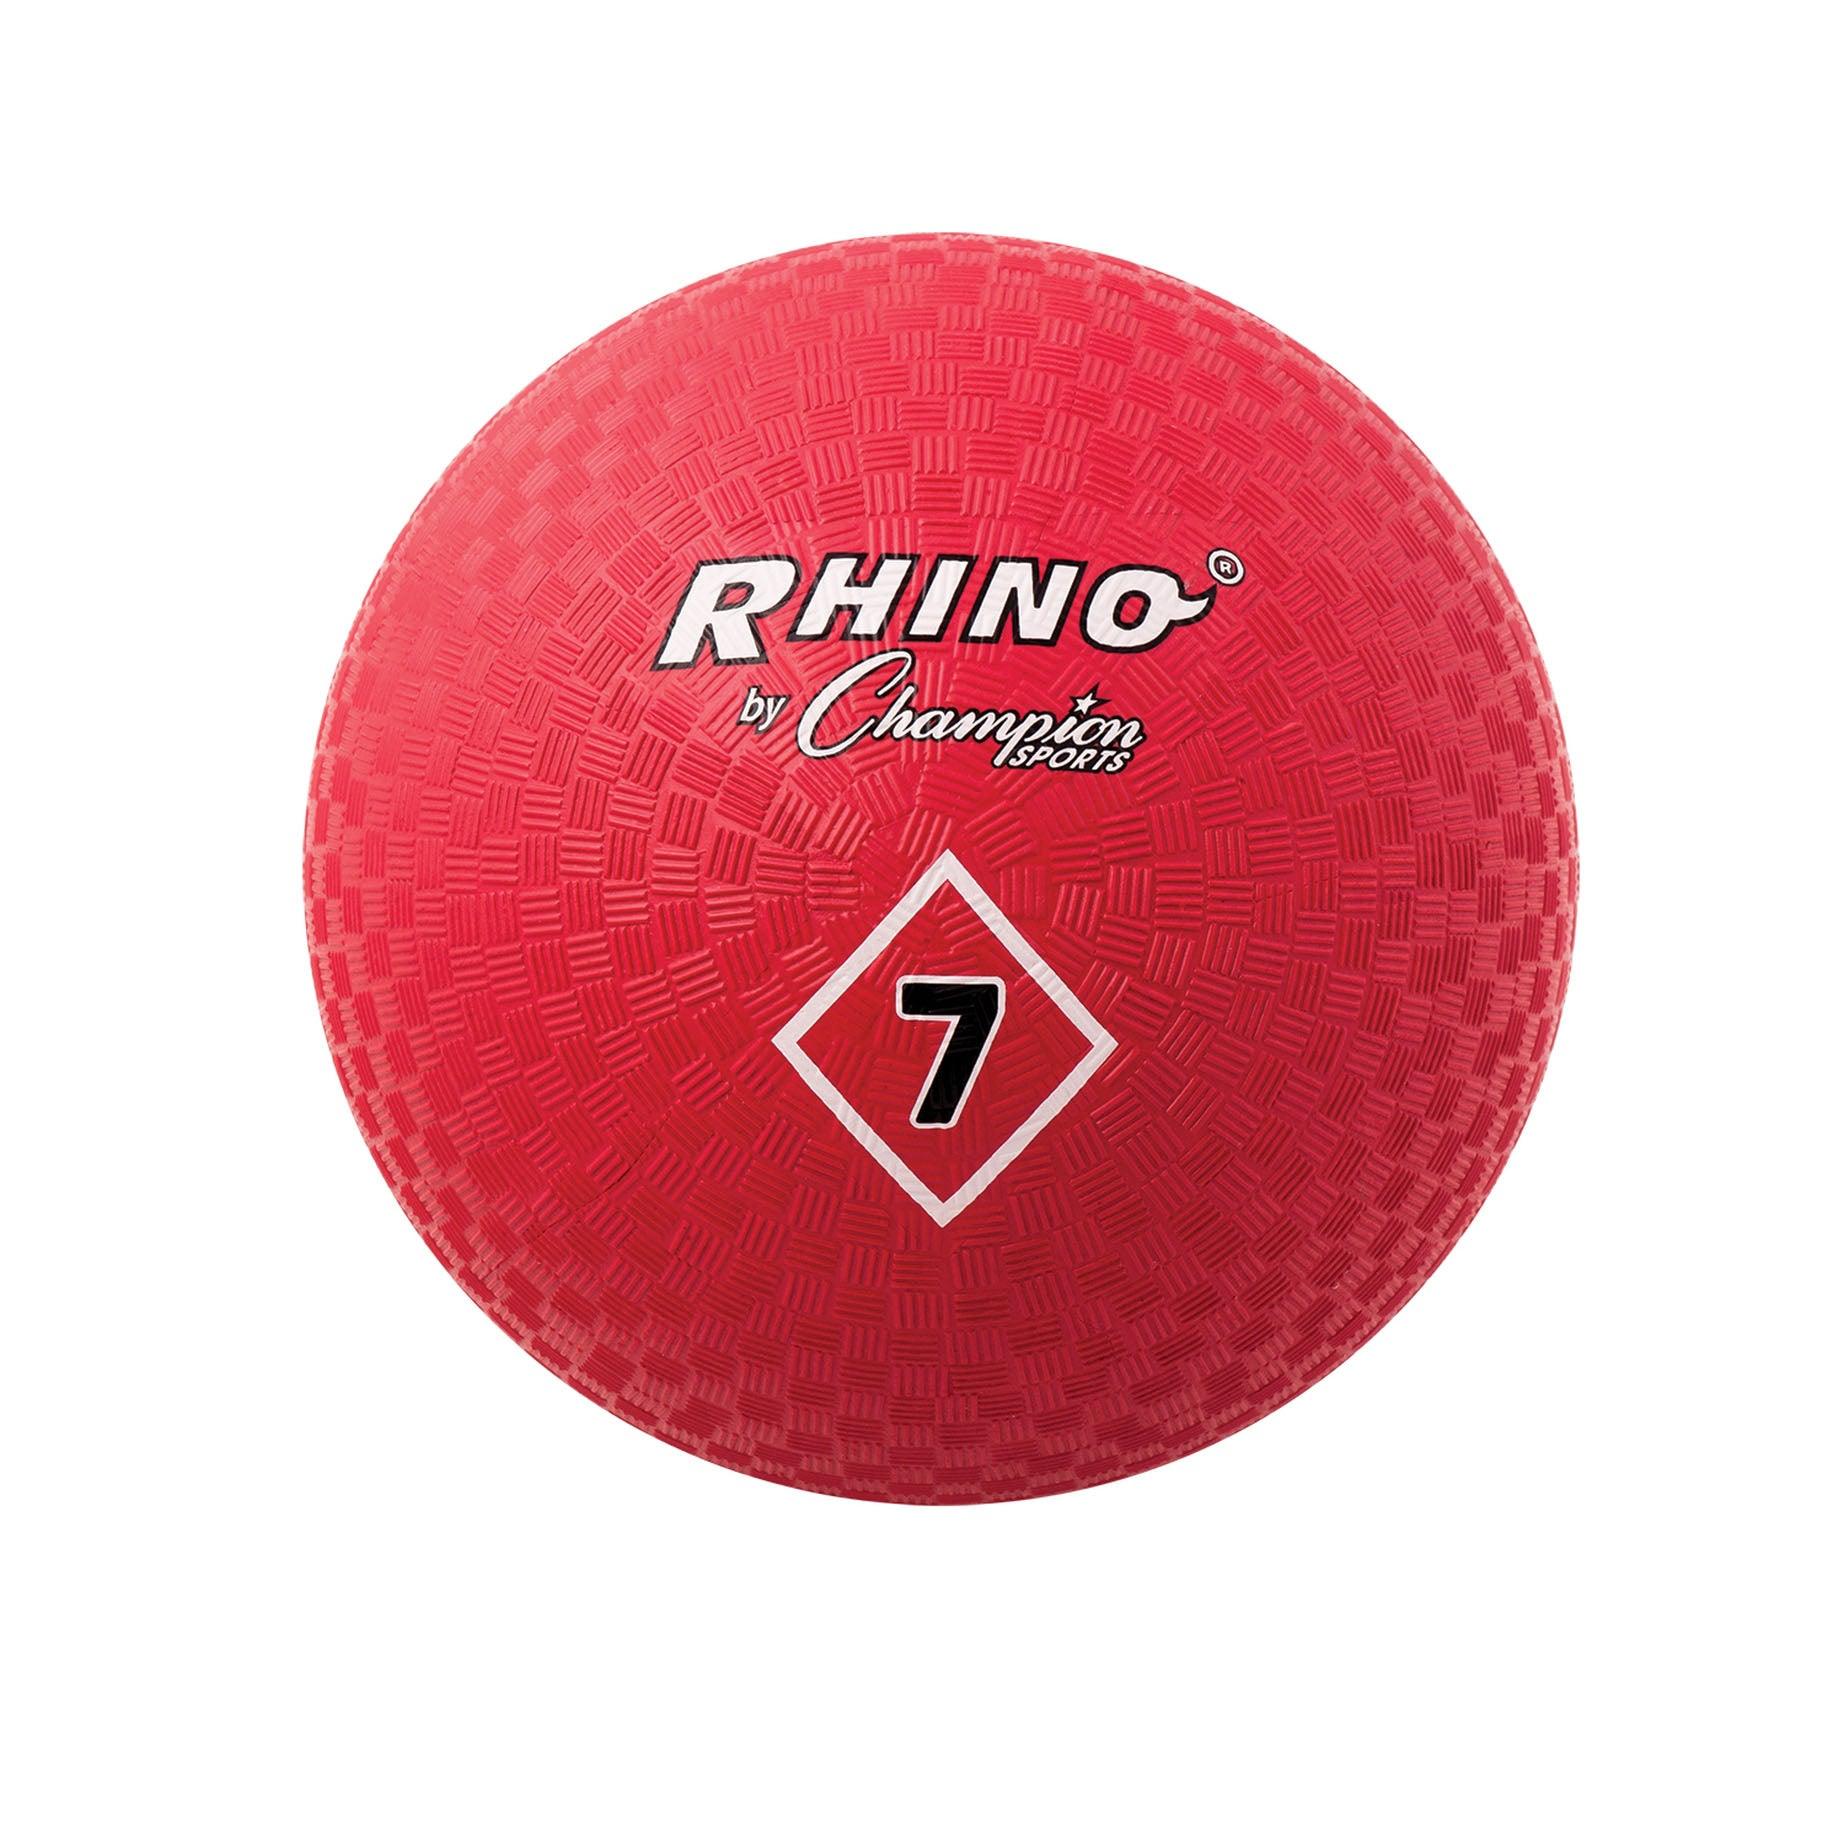 Playground Ball, 7", Red, Pack of 3 - Loomini